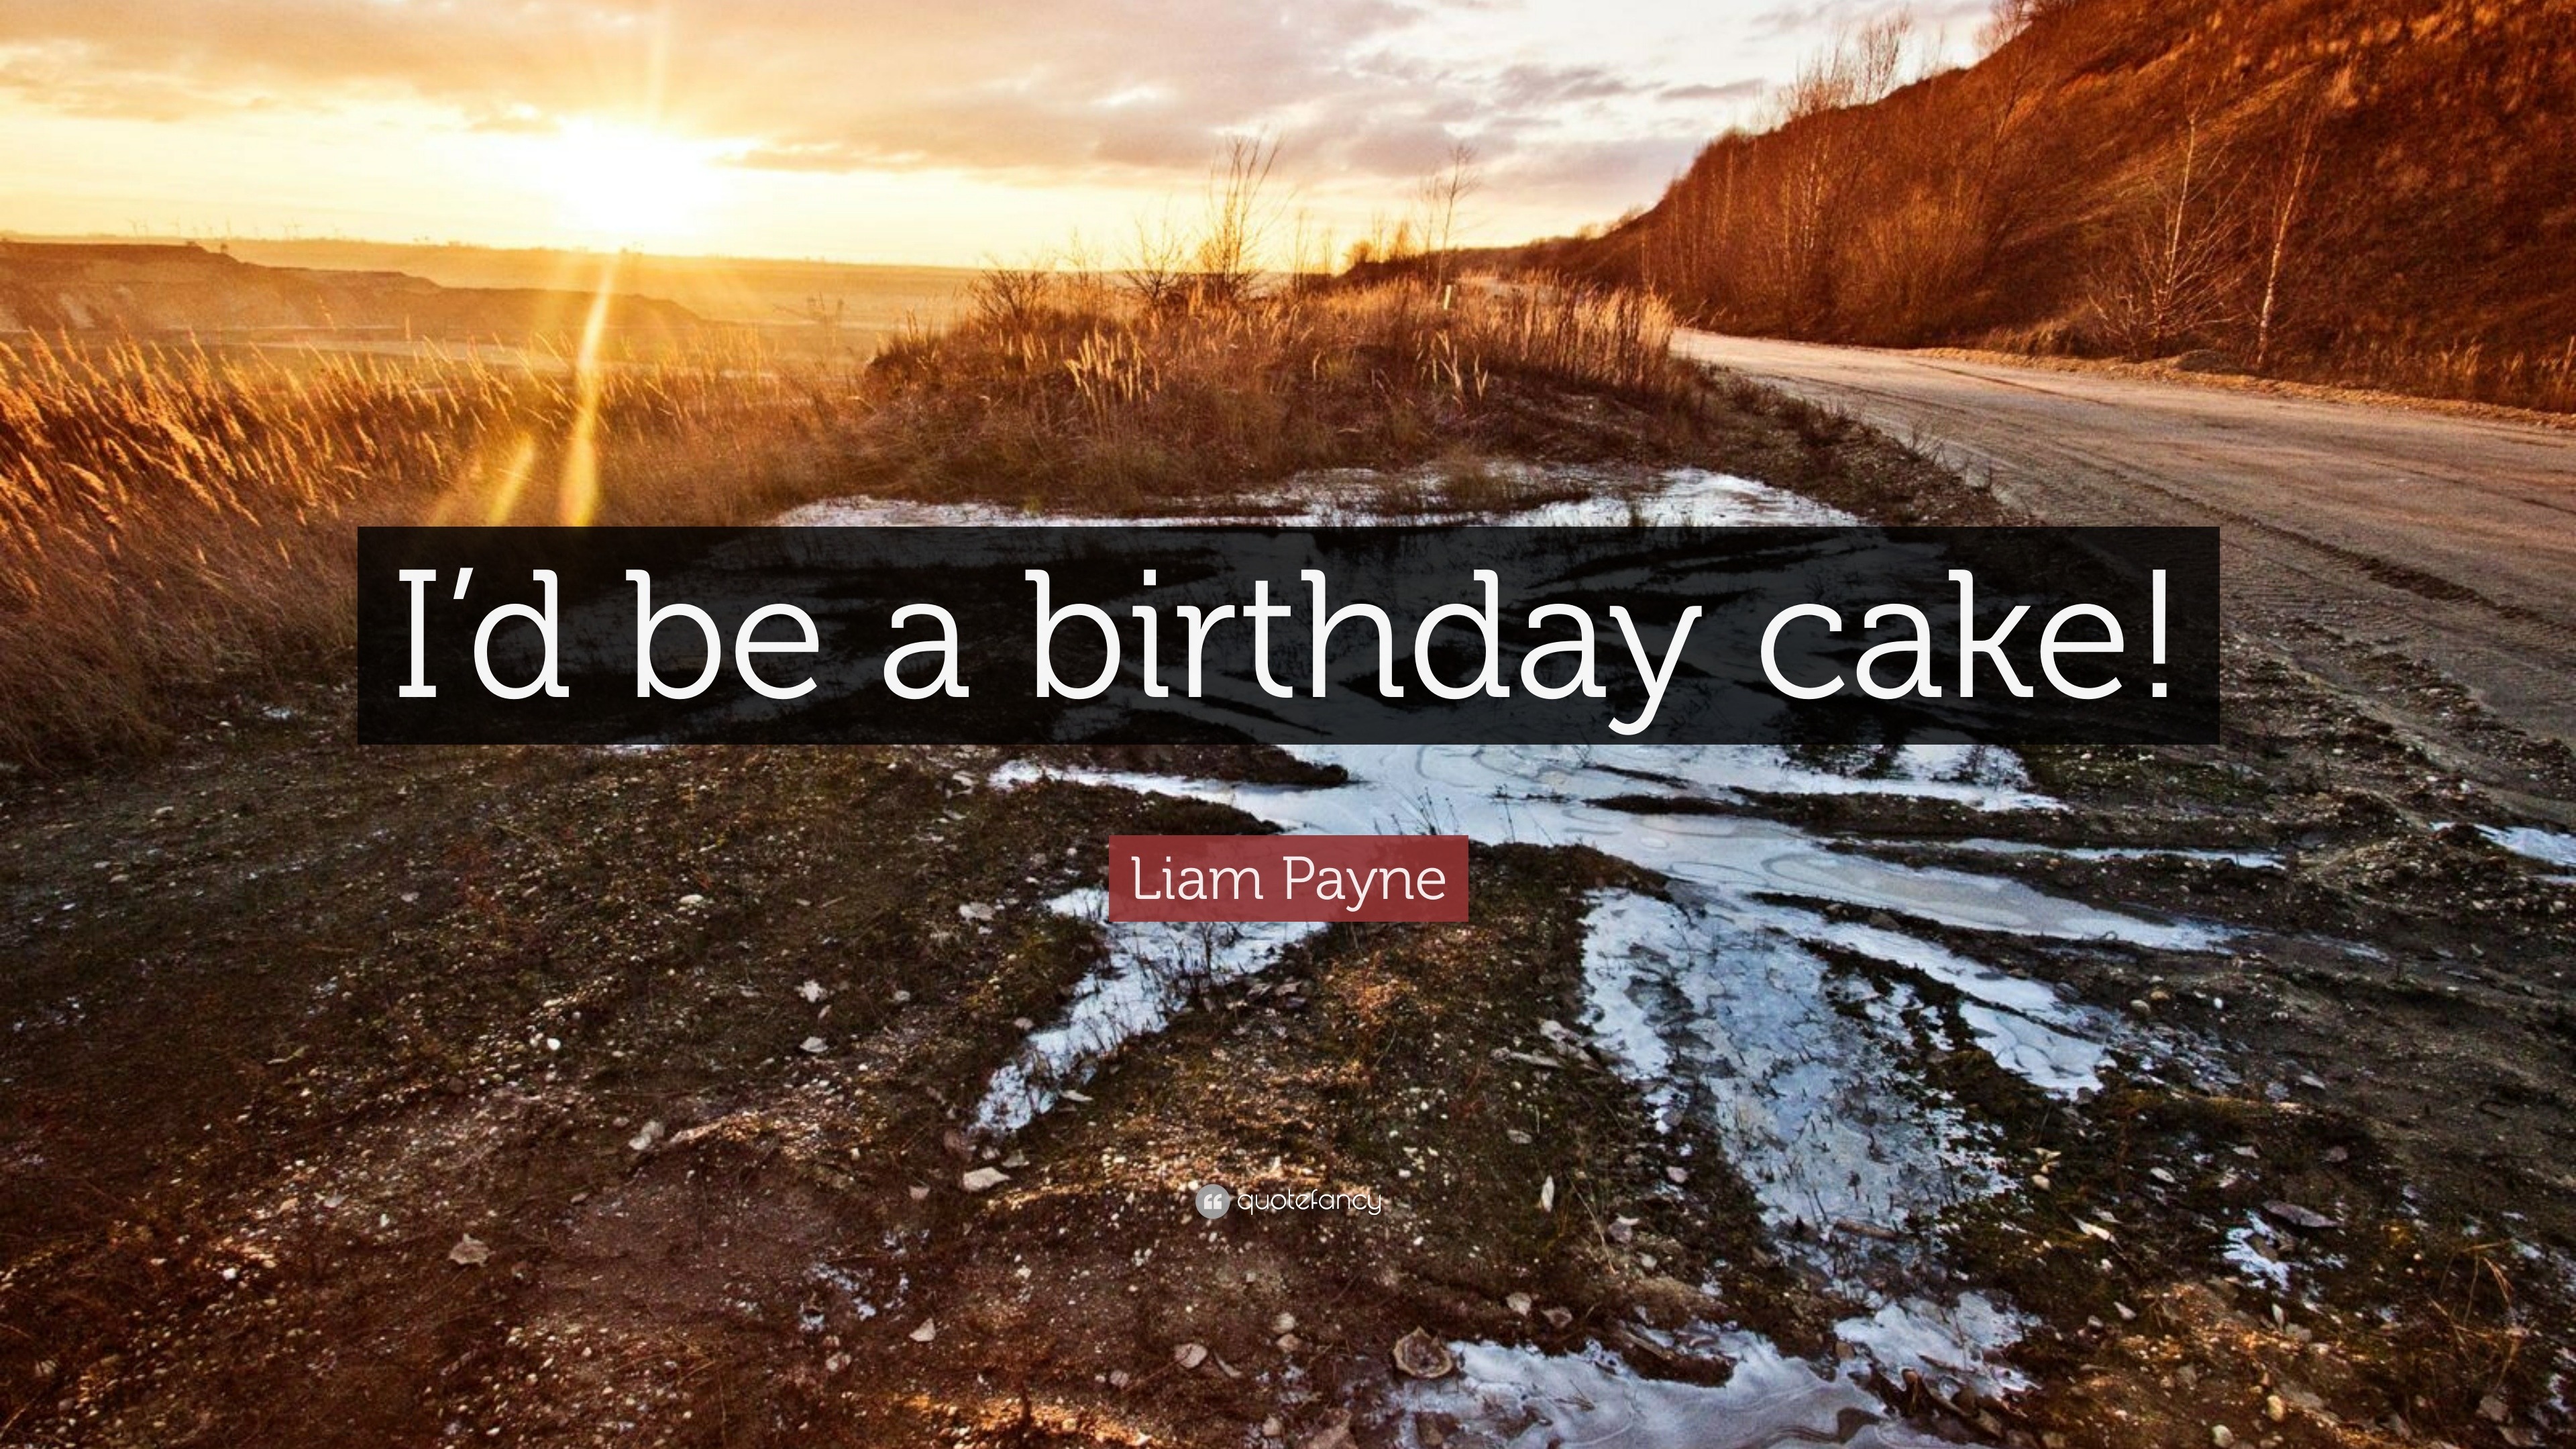 Happy Birthday Wishes, Cake Images, Greeting Cards, Messages, Quotes  (English) - The Birthday Wishes